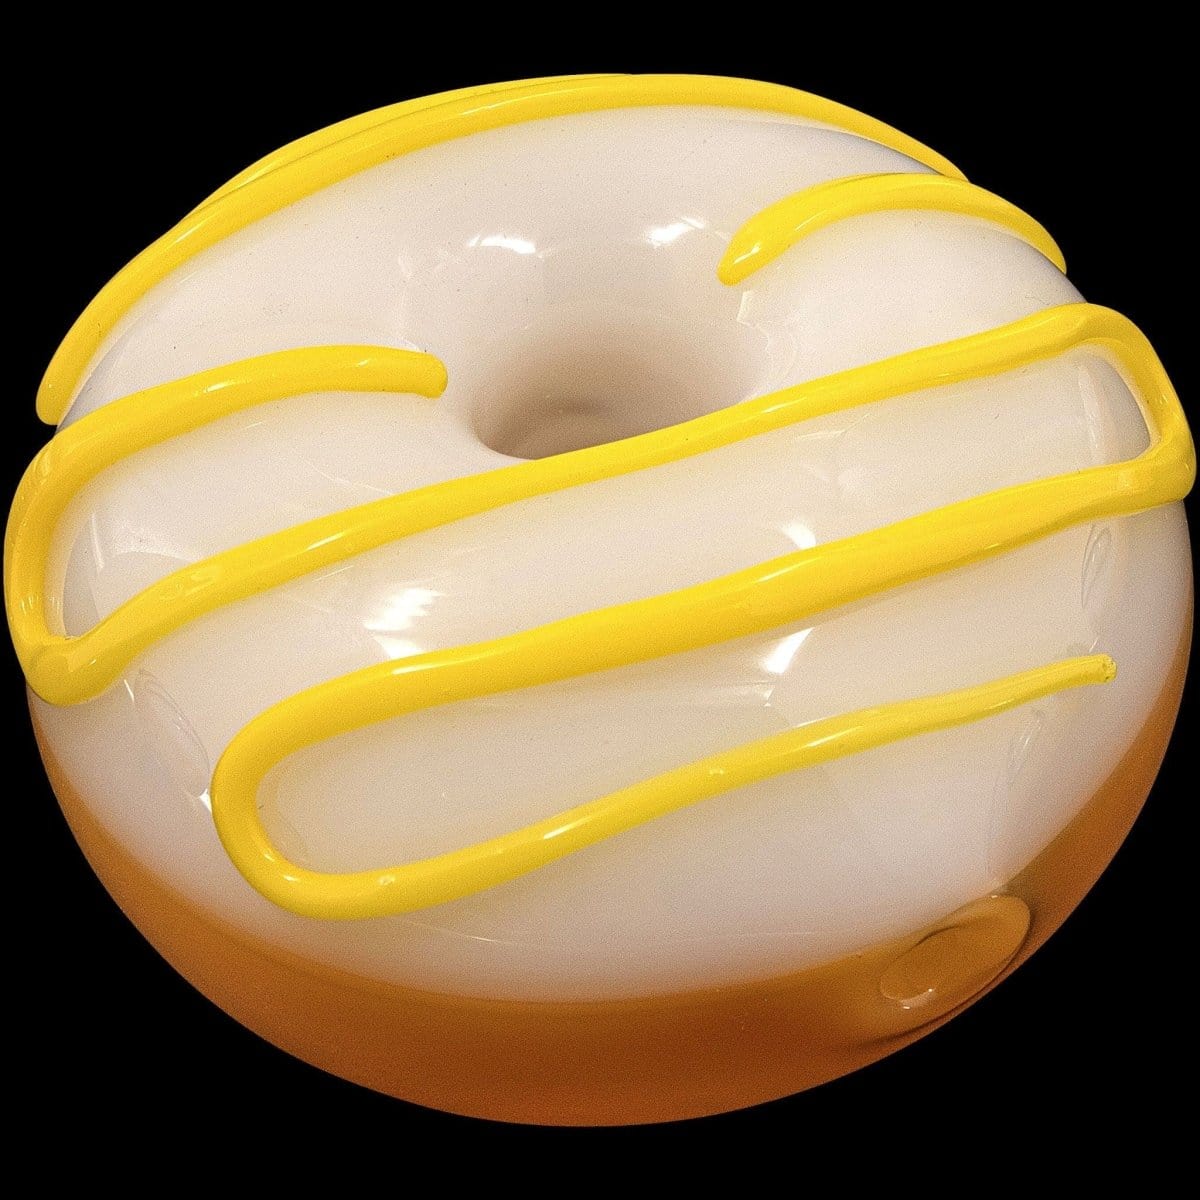 LA Pipes Hand Pipe Lemon Frosting "Frosted Donut" Glass Pipe